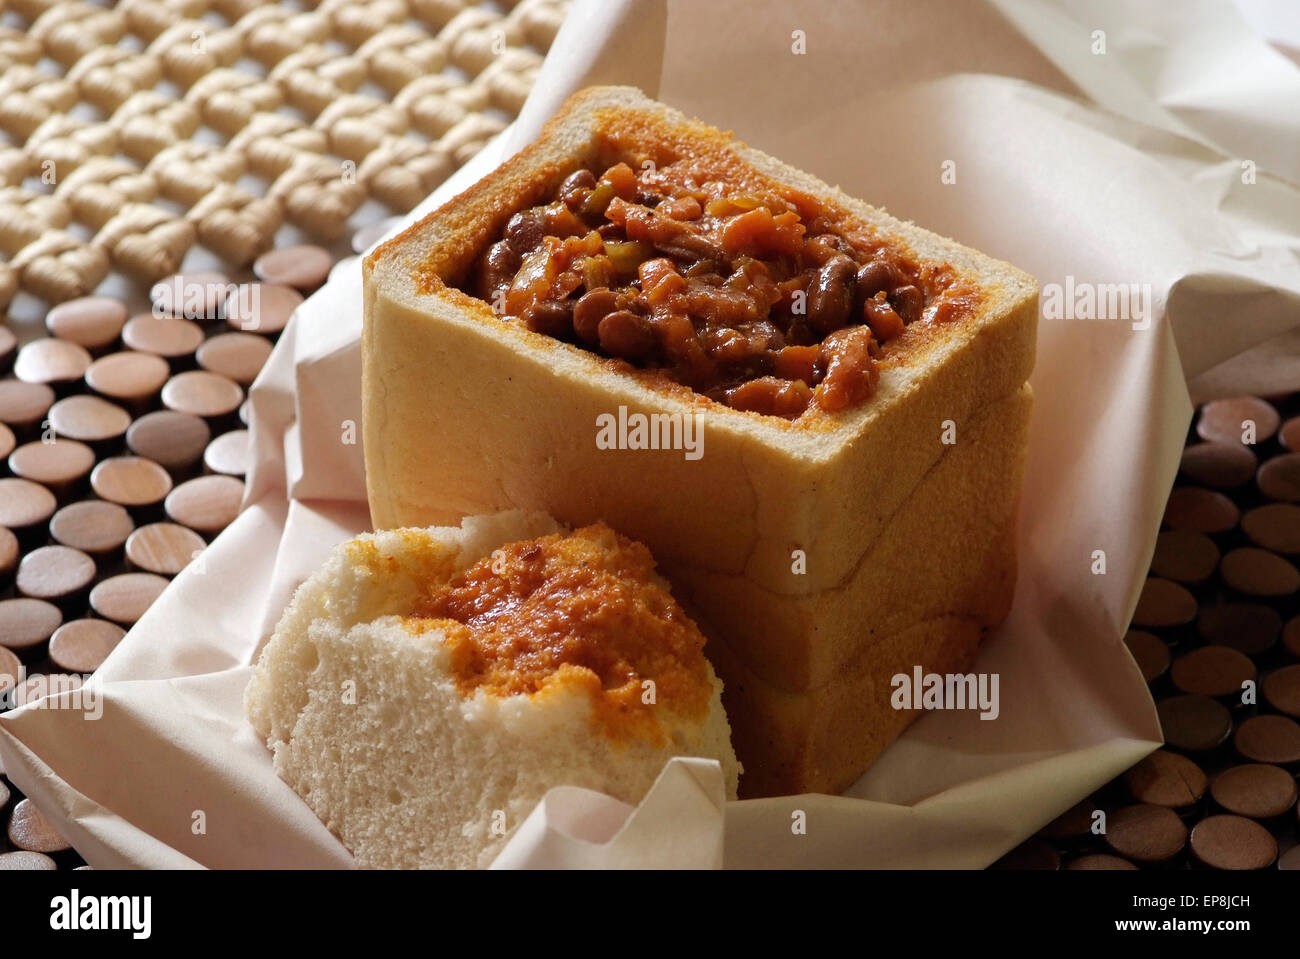 Bunny chow is a meal found exclsively in South Africa and it has its origins in Durban Kwa zulu Natal it is curry served in half loaf of fresh dug out white bread Stock Photo